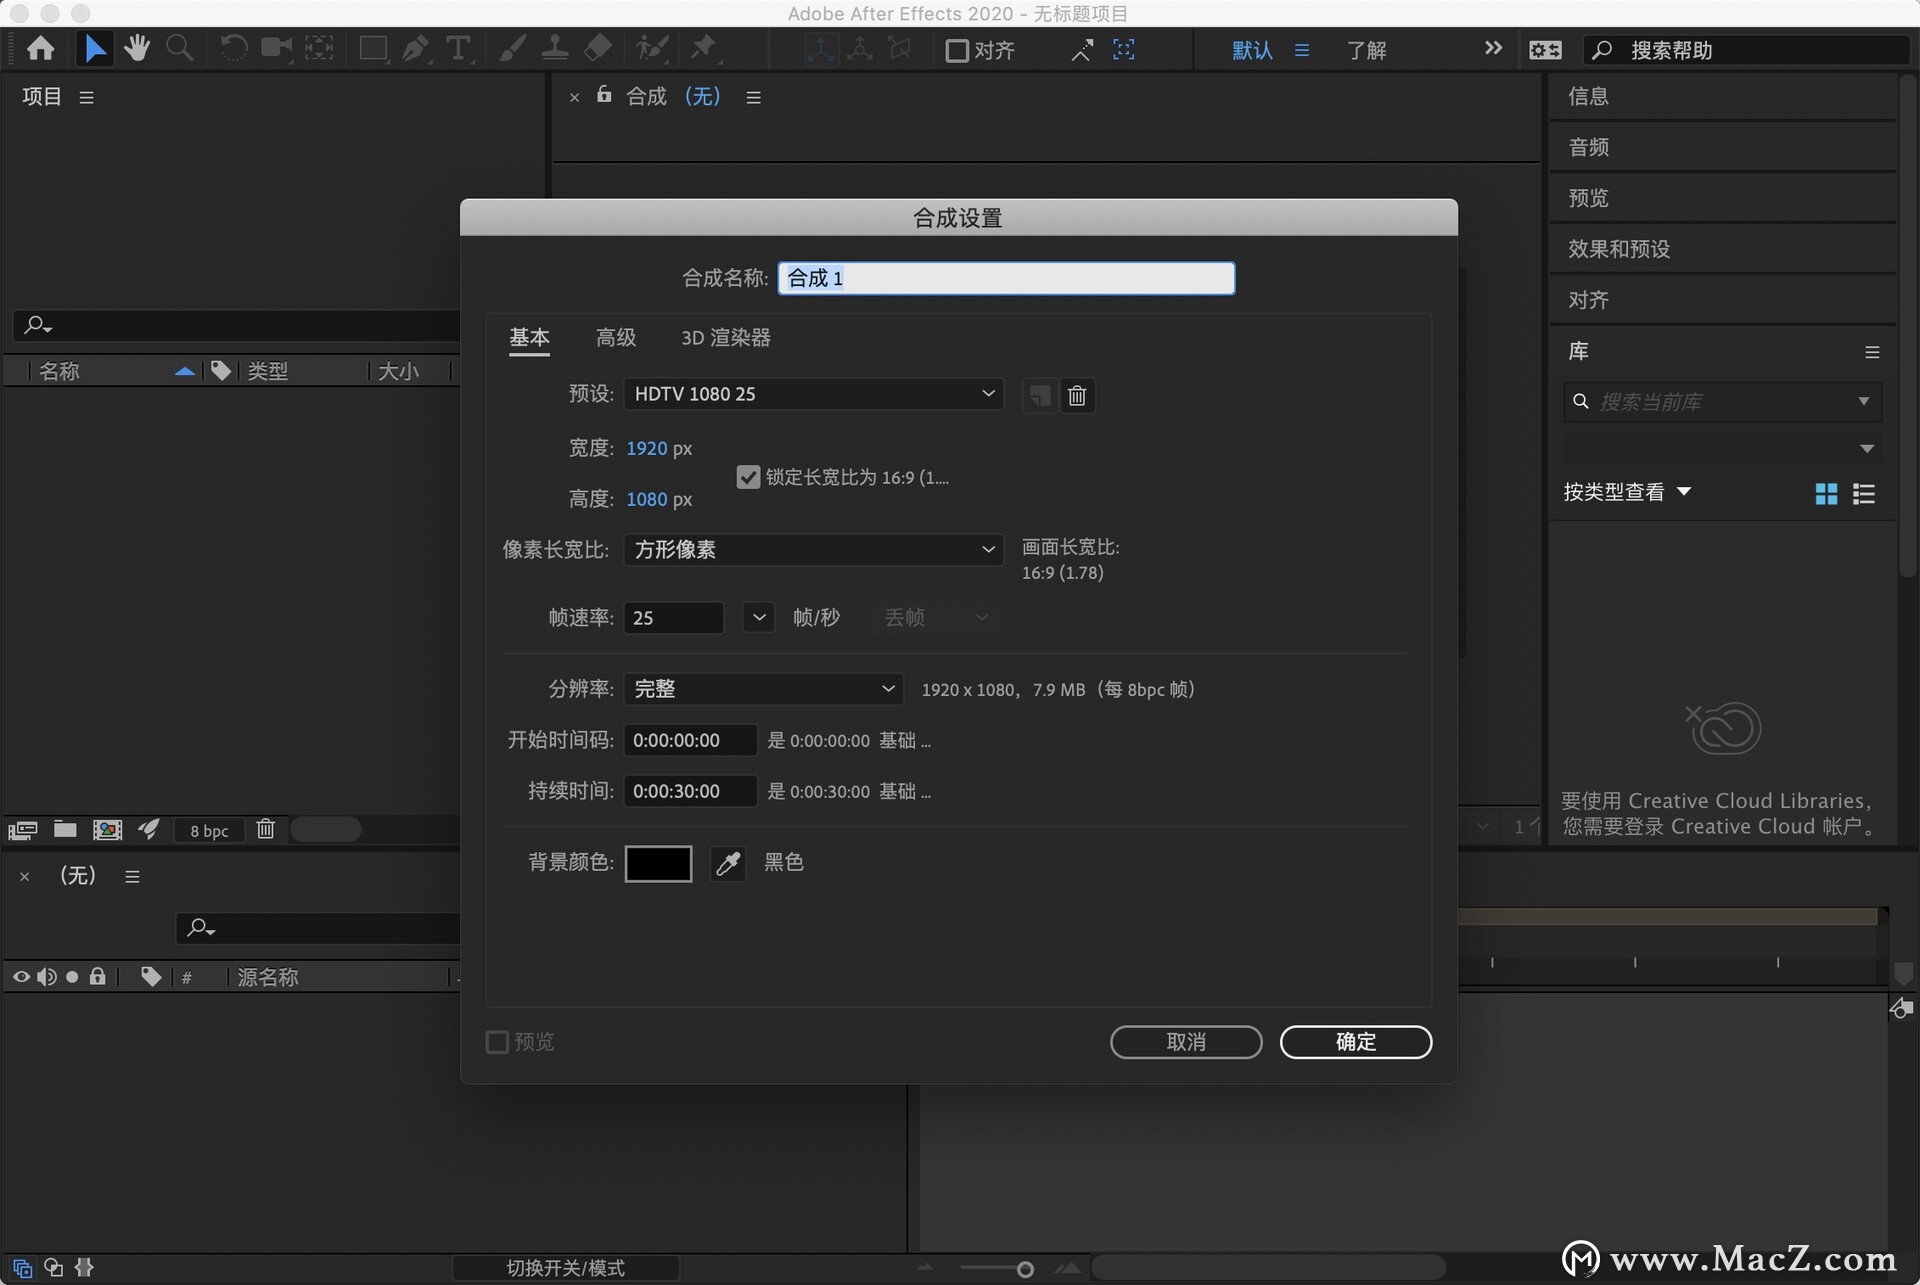 After Effects 2021 for Mac ae 中文激活版 - 图2